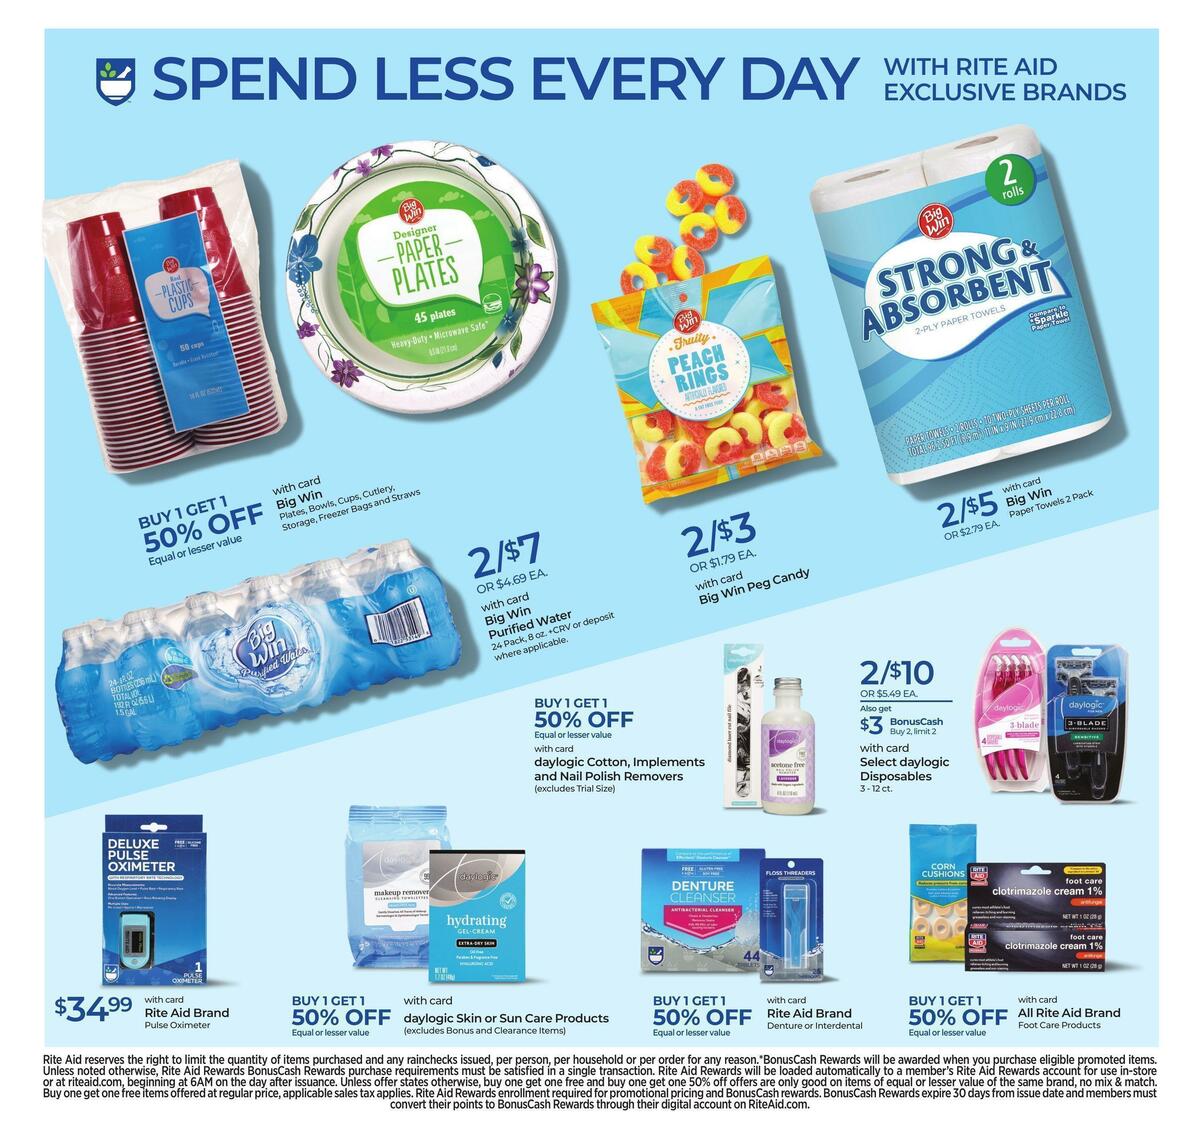 Rite Aid Weekly Ad from March 13